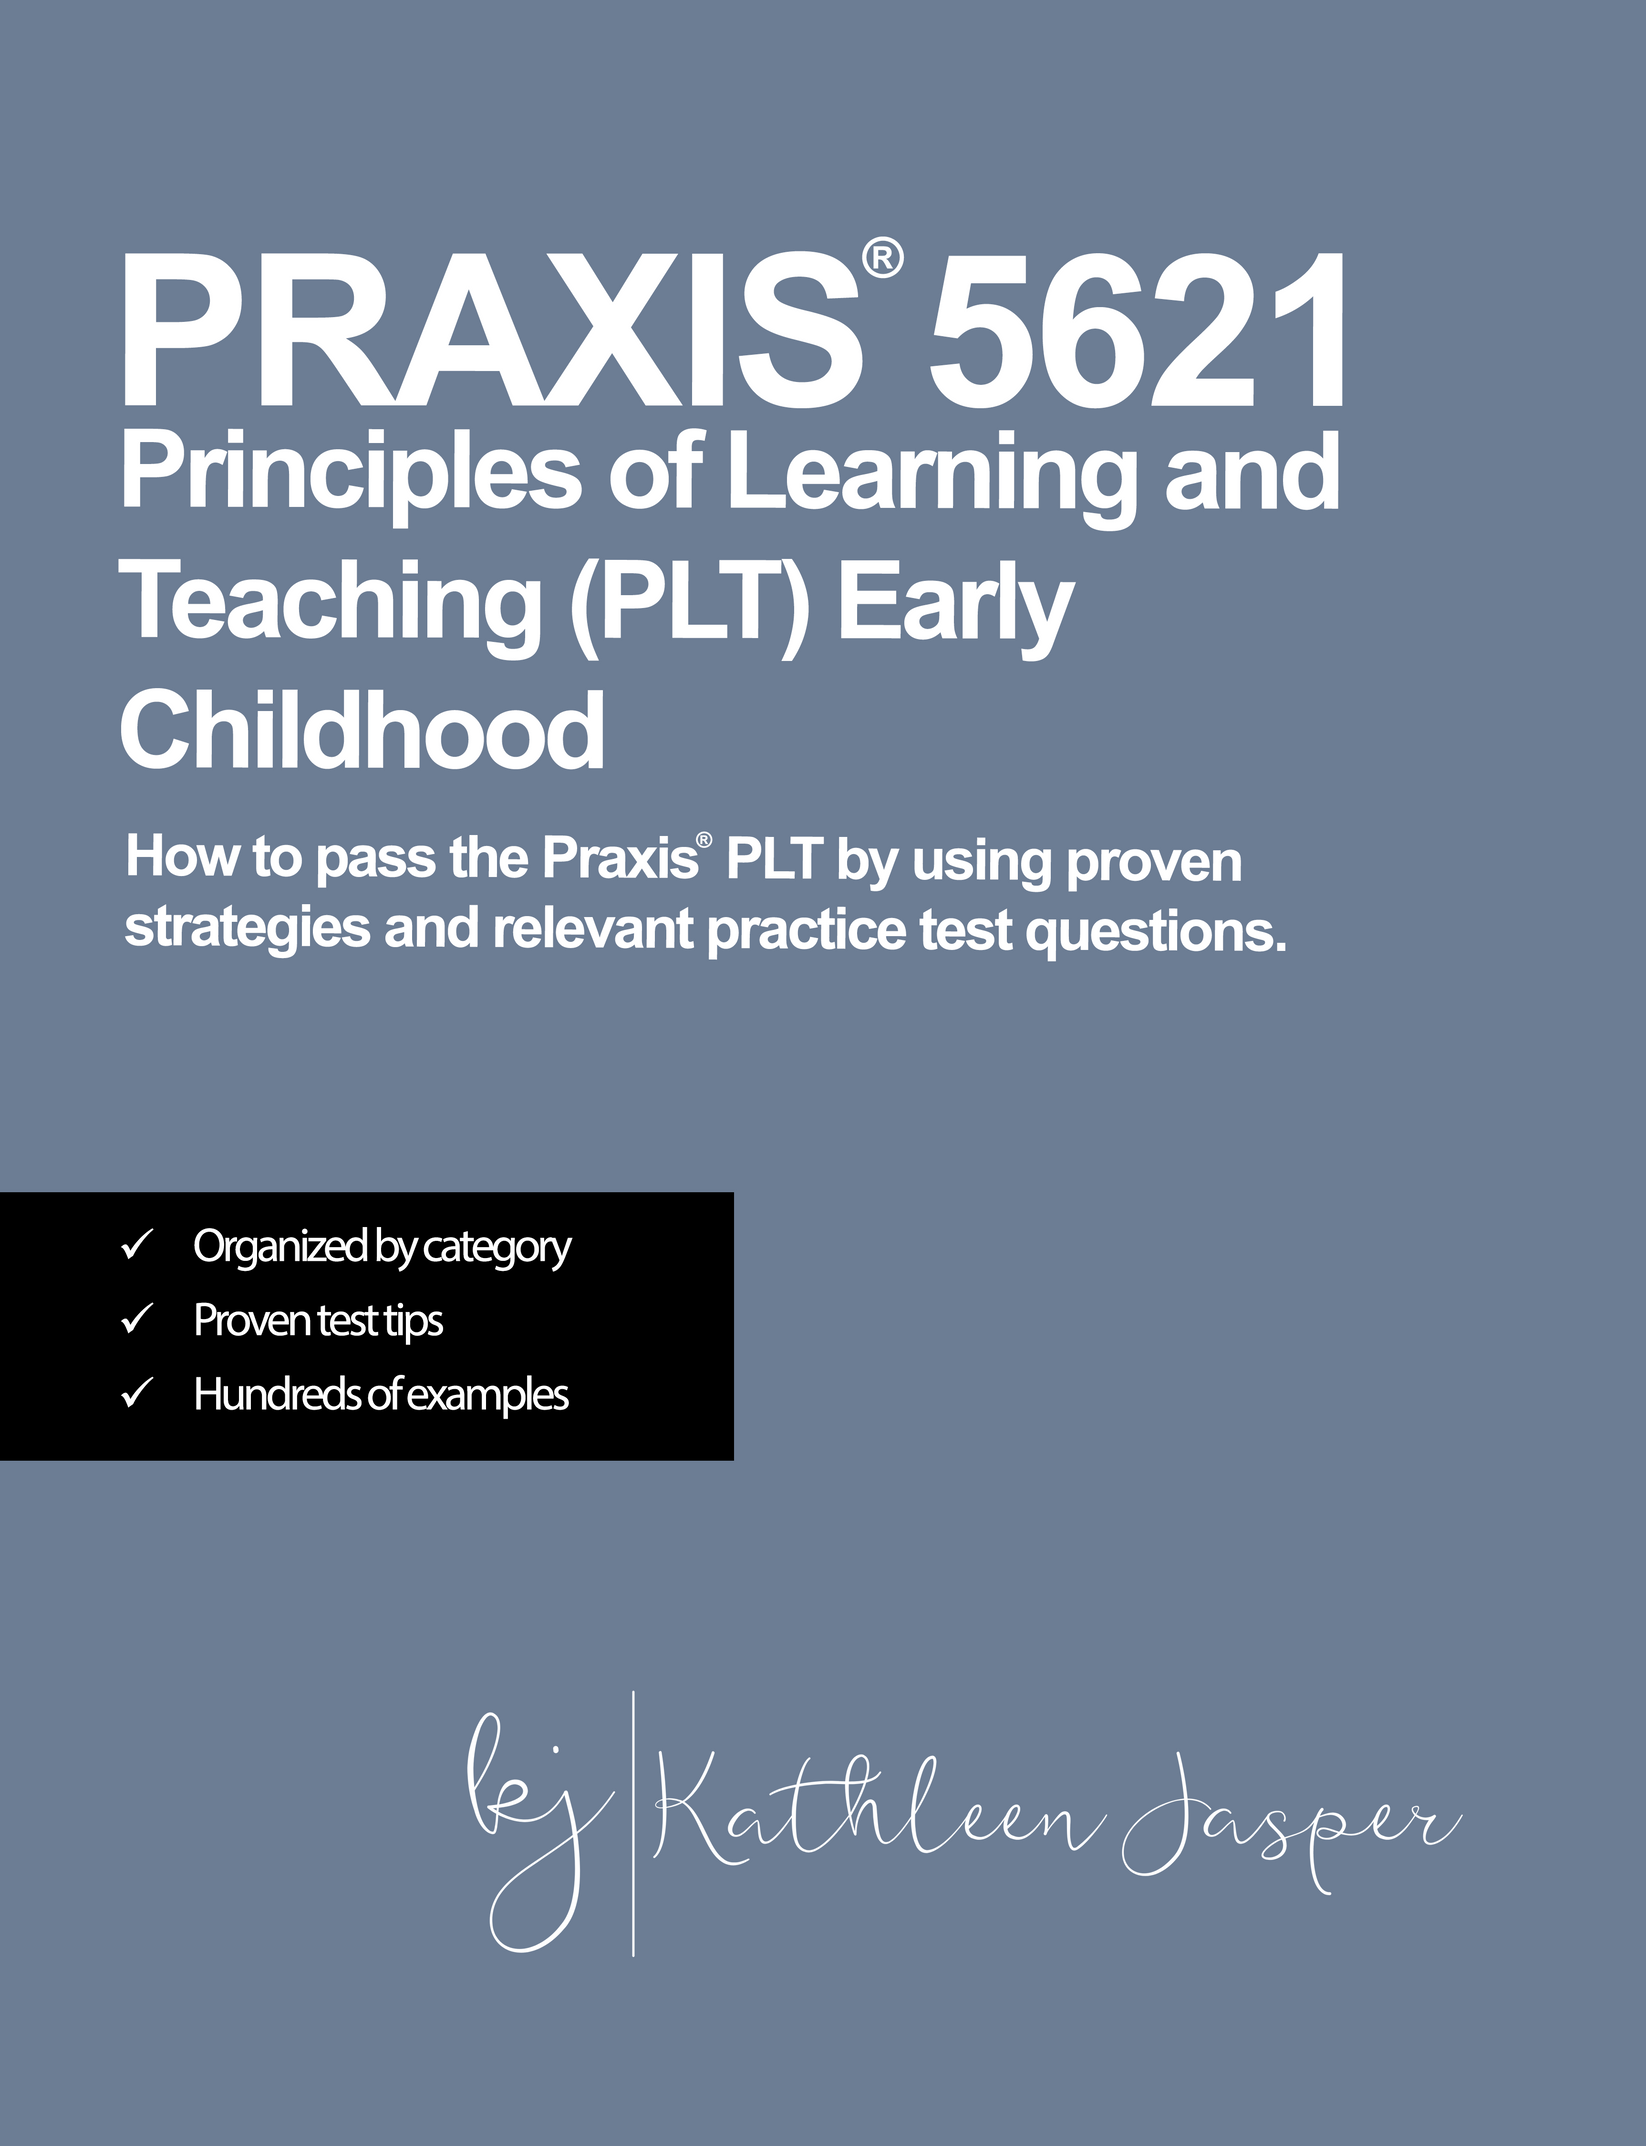 Praxis PLT 5621 Early Childhood Overview